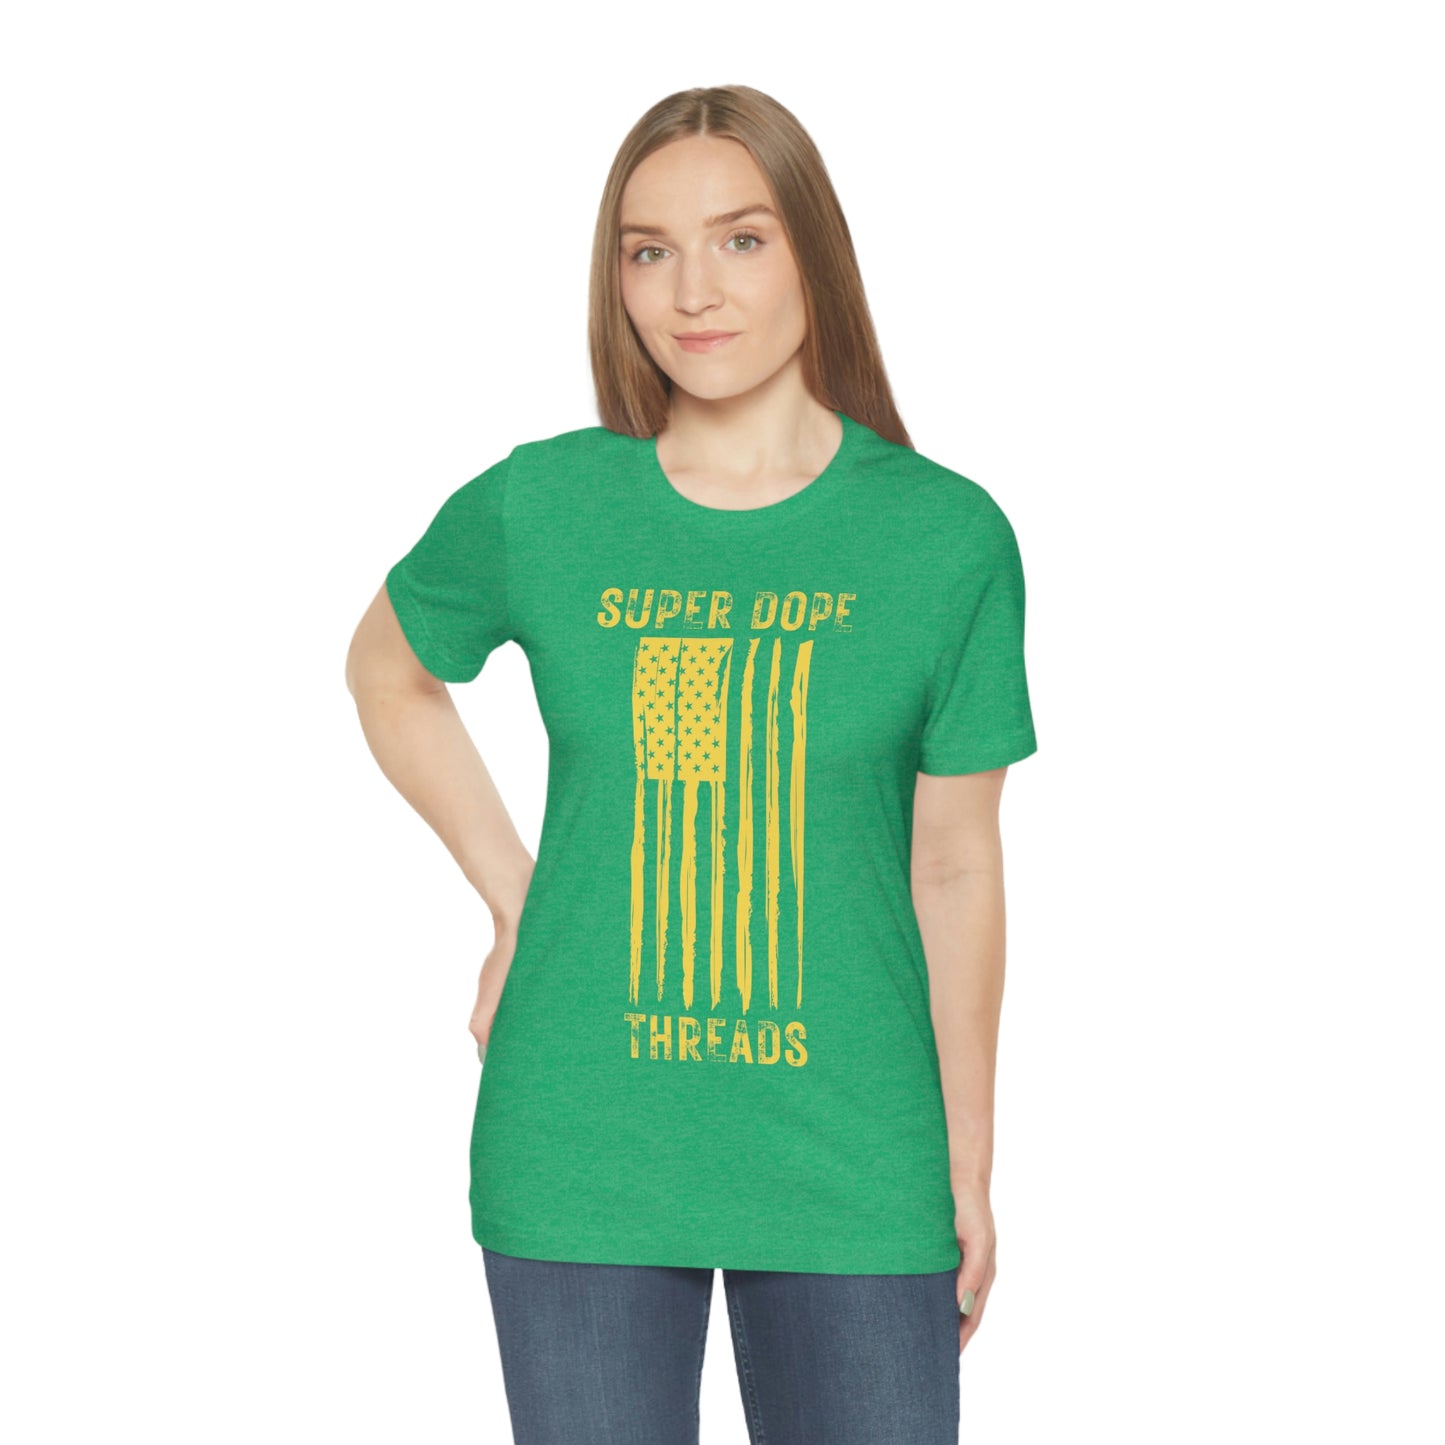 Super Dope Threads - American Proud Green and Yellow